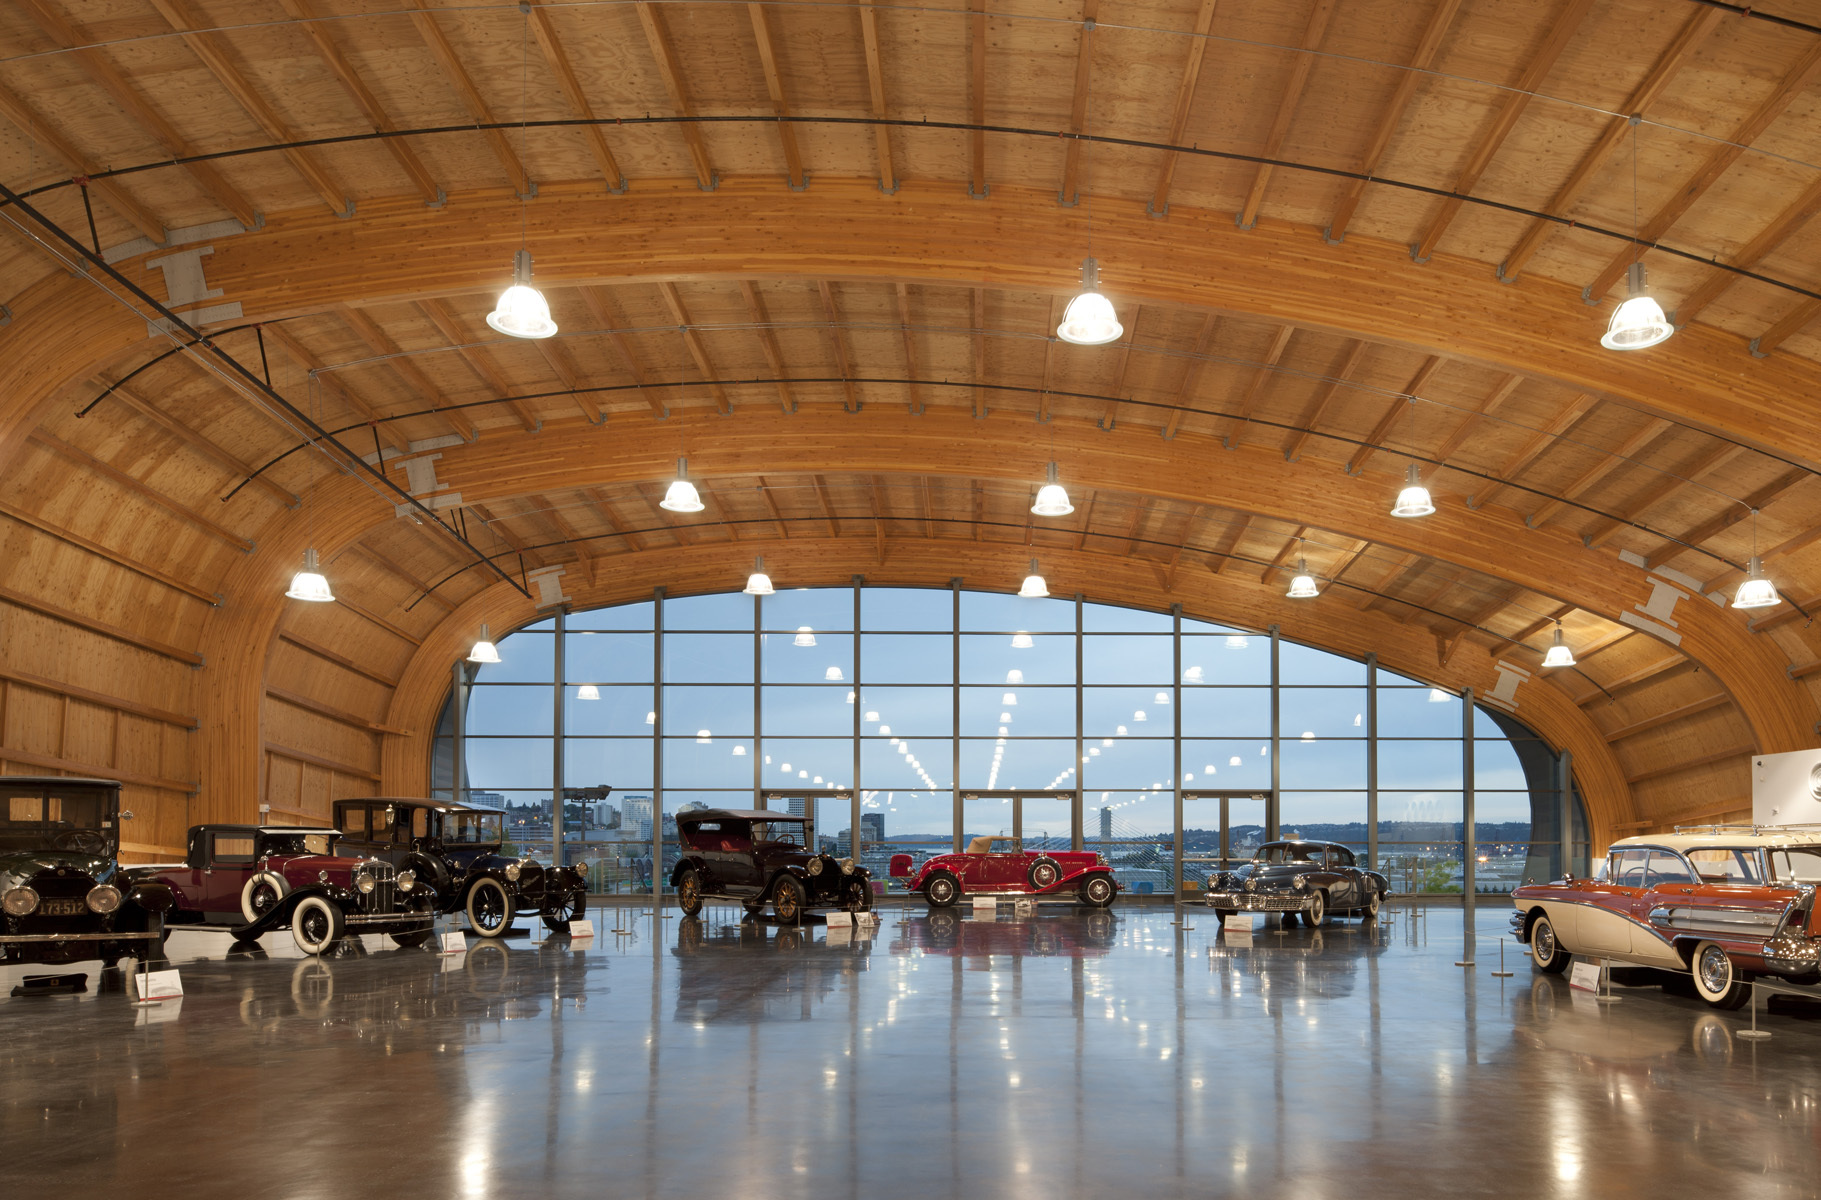 The LeMay Car Museum